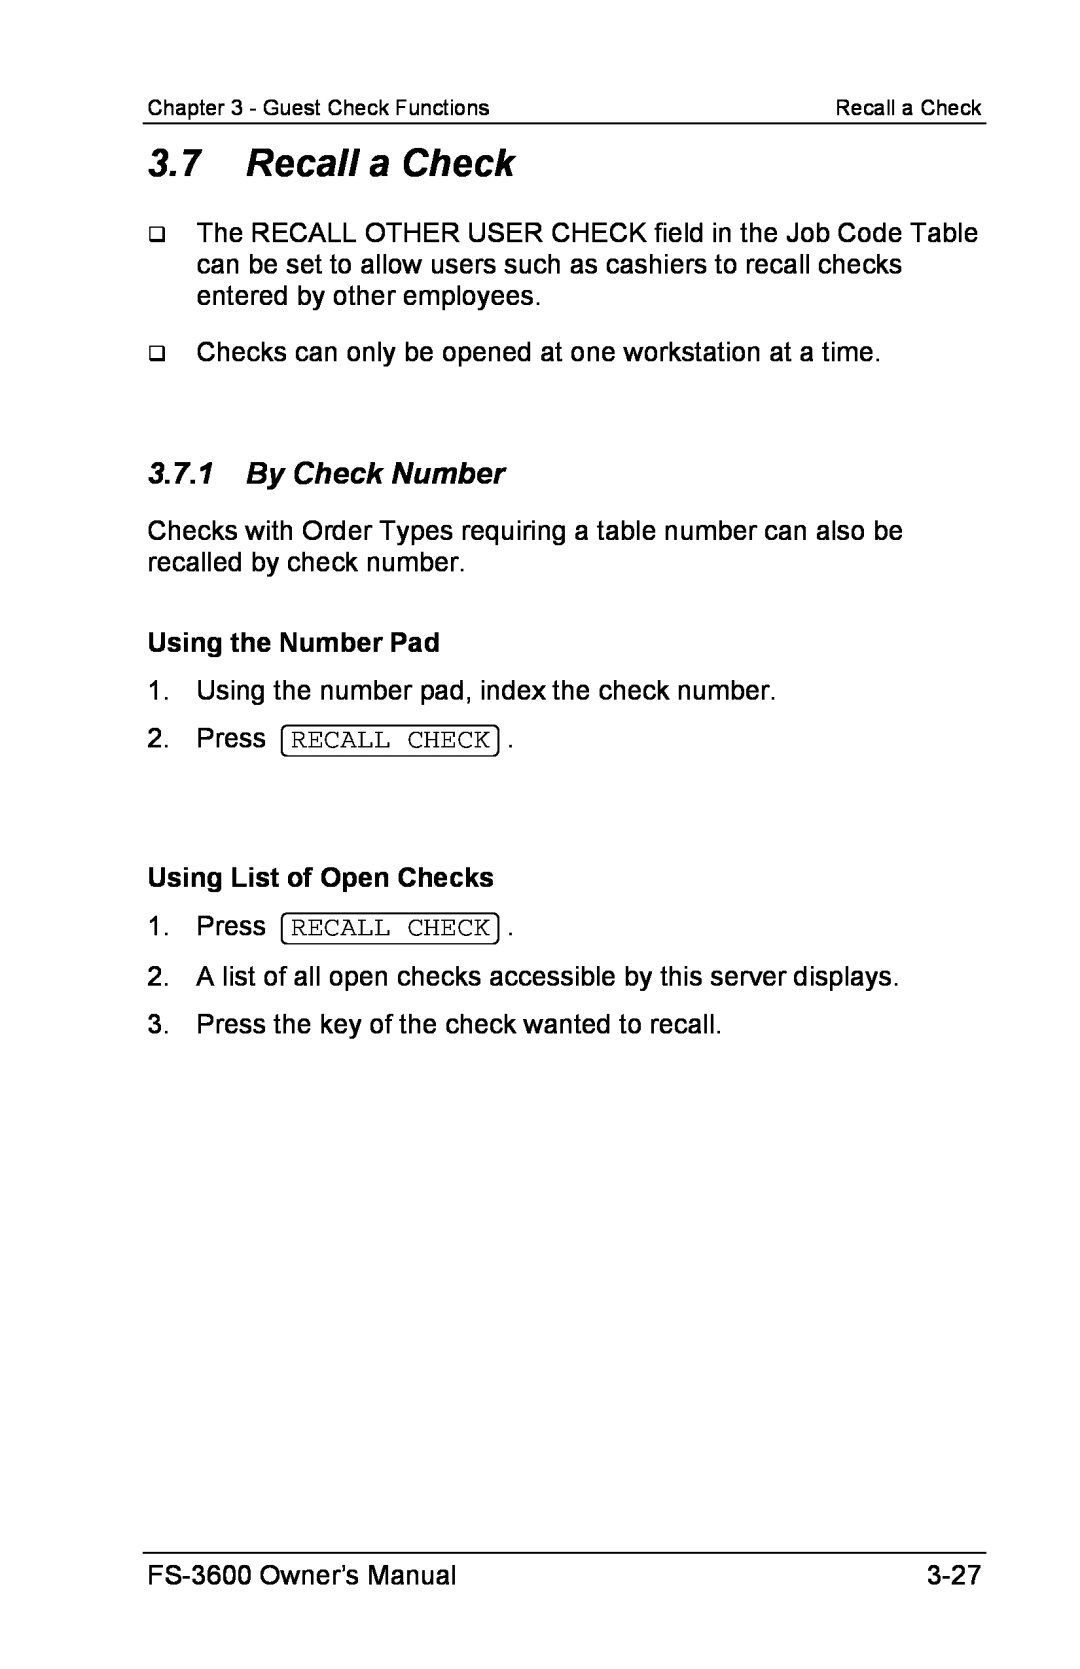 Toshiba FS-3600 owner manual 3.7Recall a Check, 3.7.1By Check Number, Using the Number Pad, Using List of Open Checks 